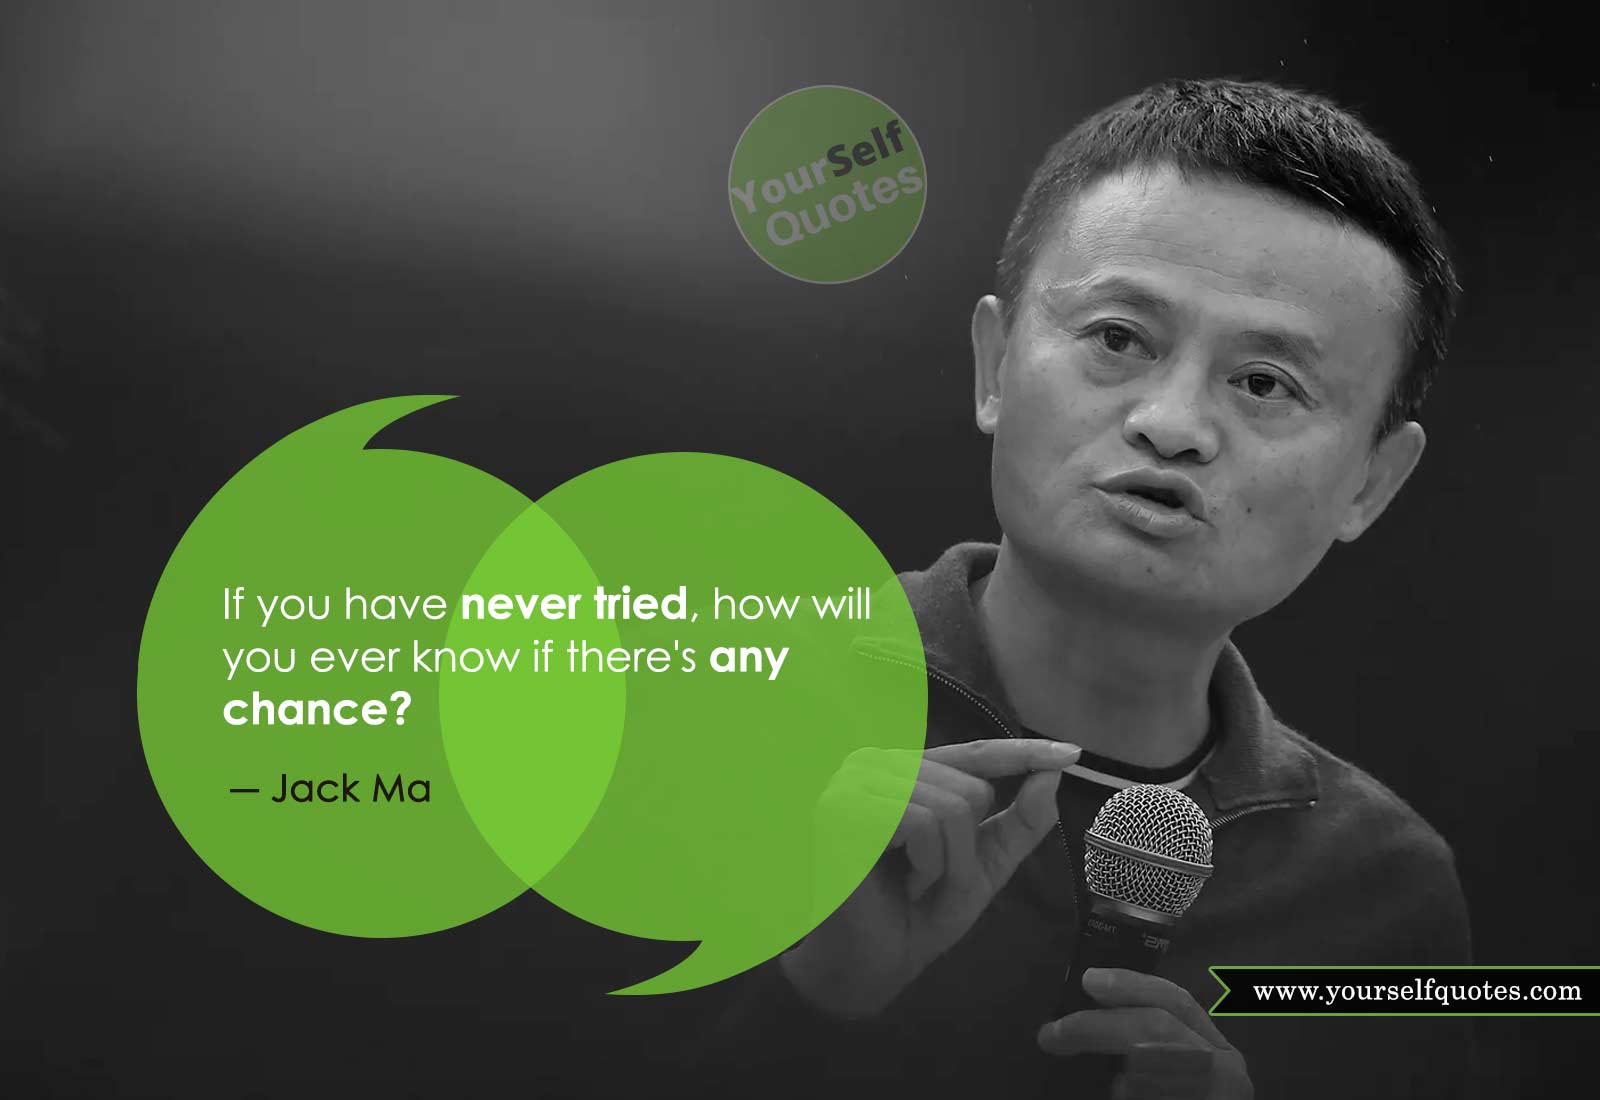 Quotes By Alibaba's Jack Ma